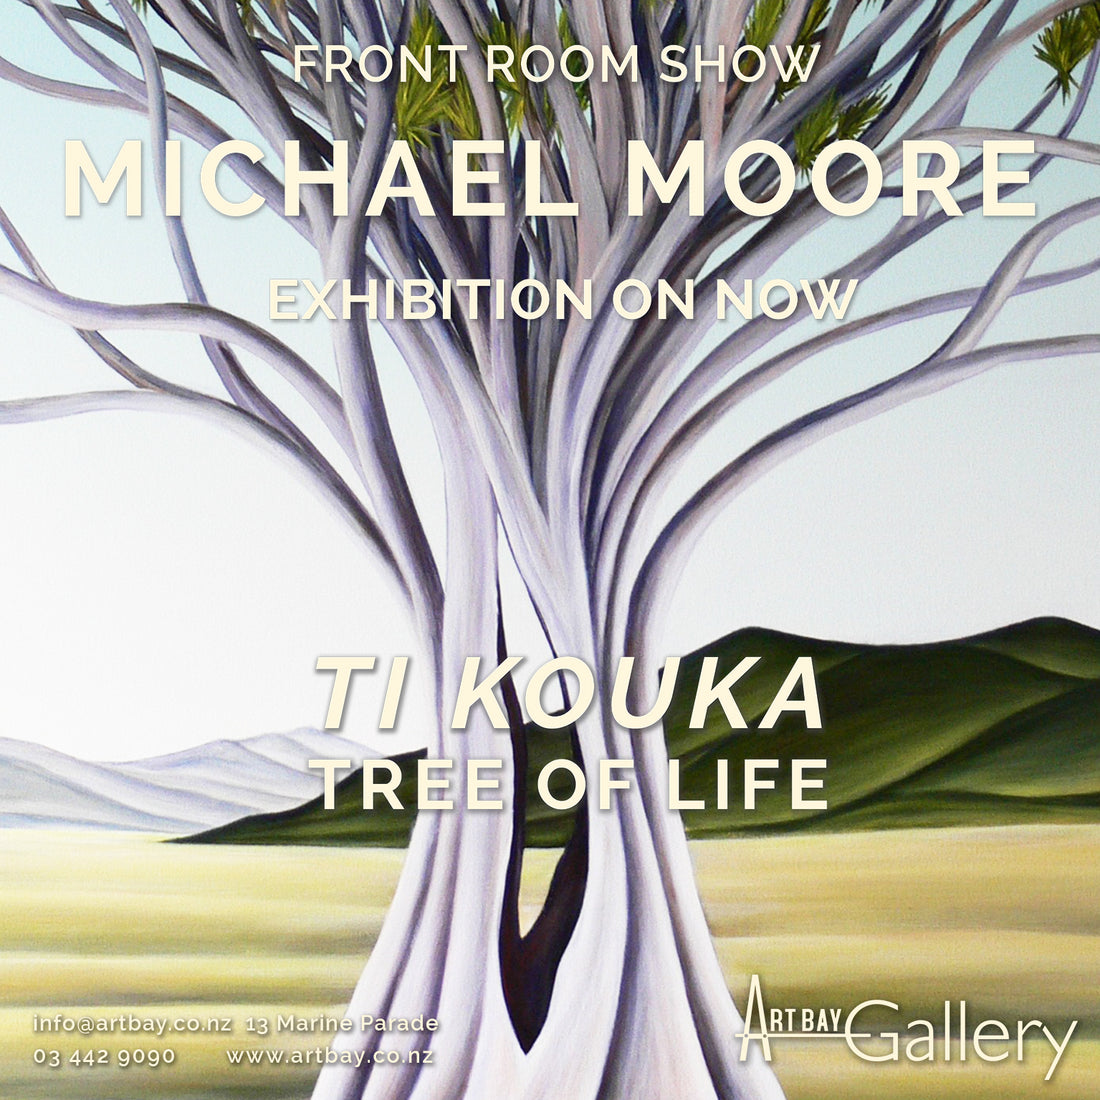 Michael Moore - Front Room Exhibition